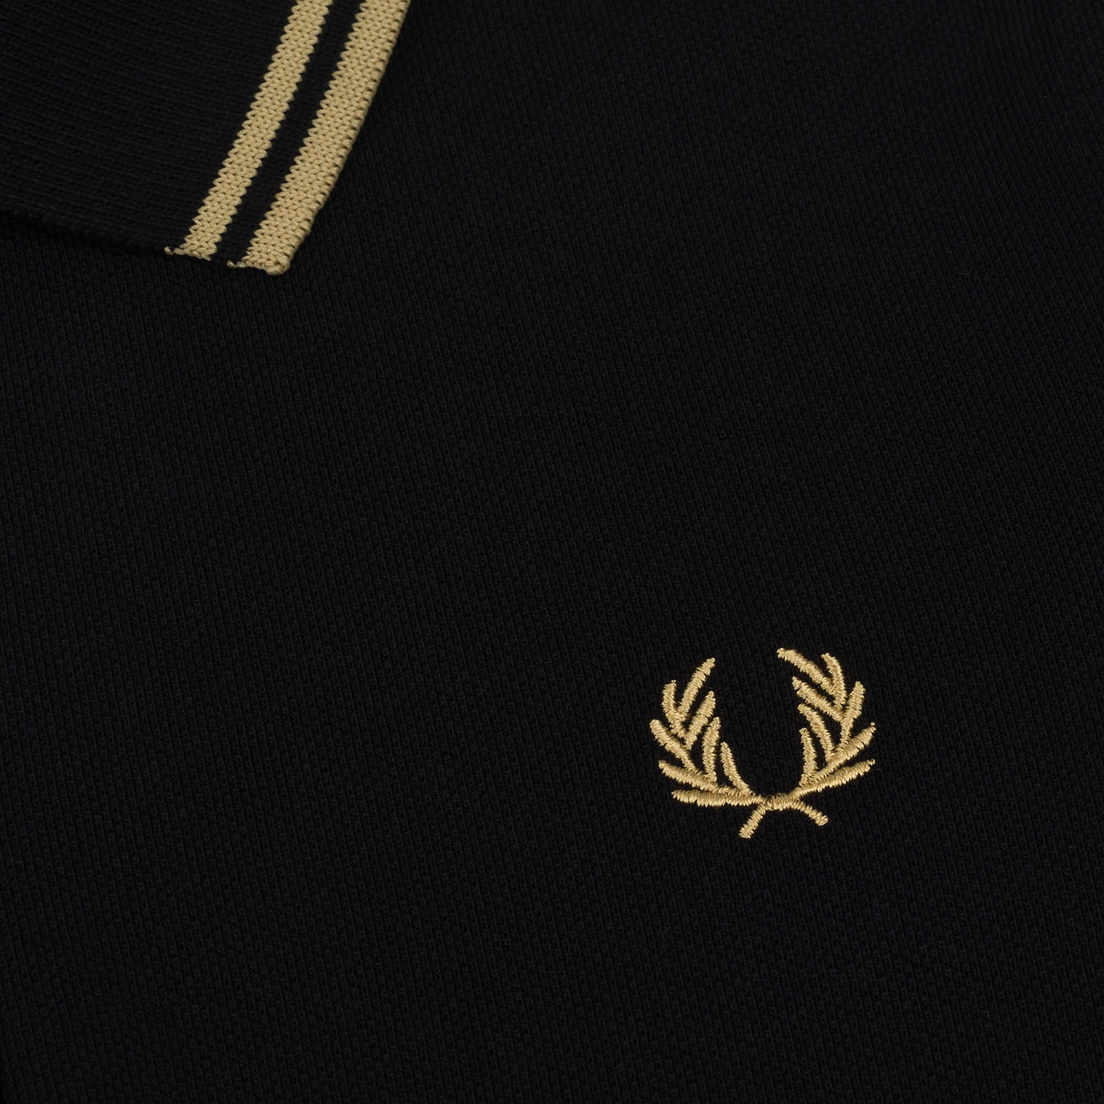 Fred Perry Женское платье Reissues Pleated Pique Tennis